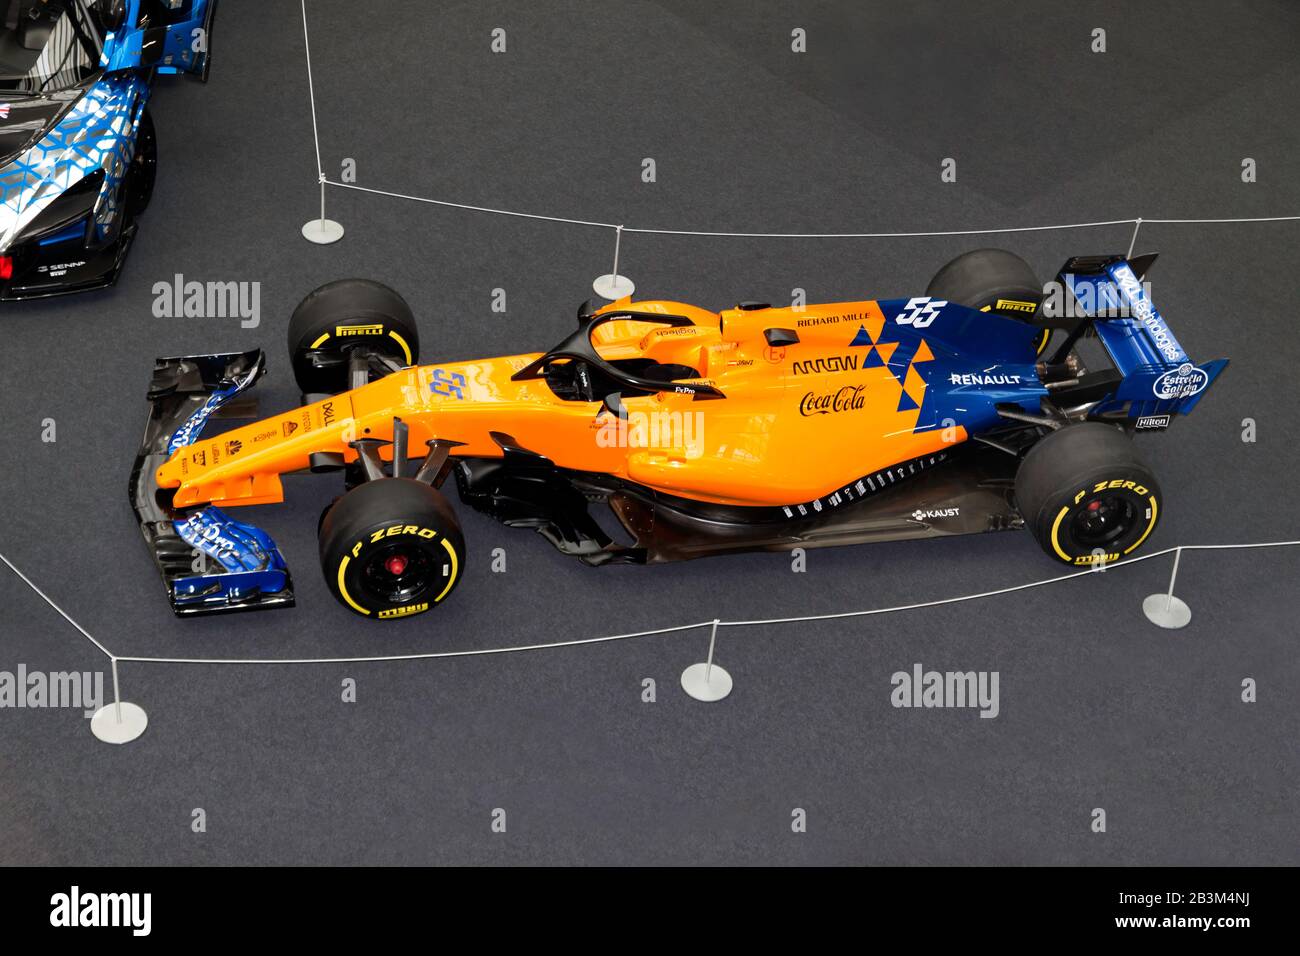 Aerial view of Carlos Sainz Jr, 2019, McLaren MCL34 Formula 1 Car, on display at the Car Stories Stage, as part of 'A Tribute to Bruce McLaren' Stock Photo